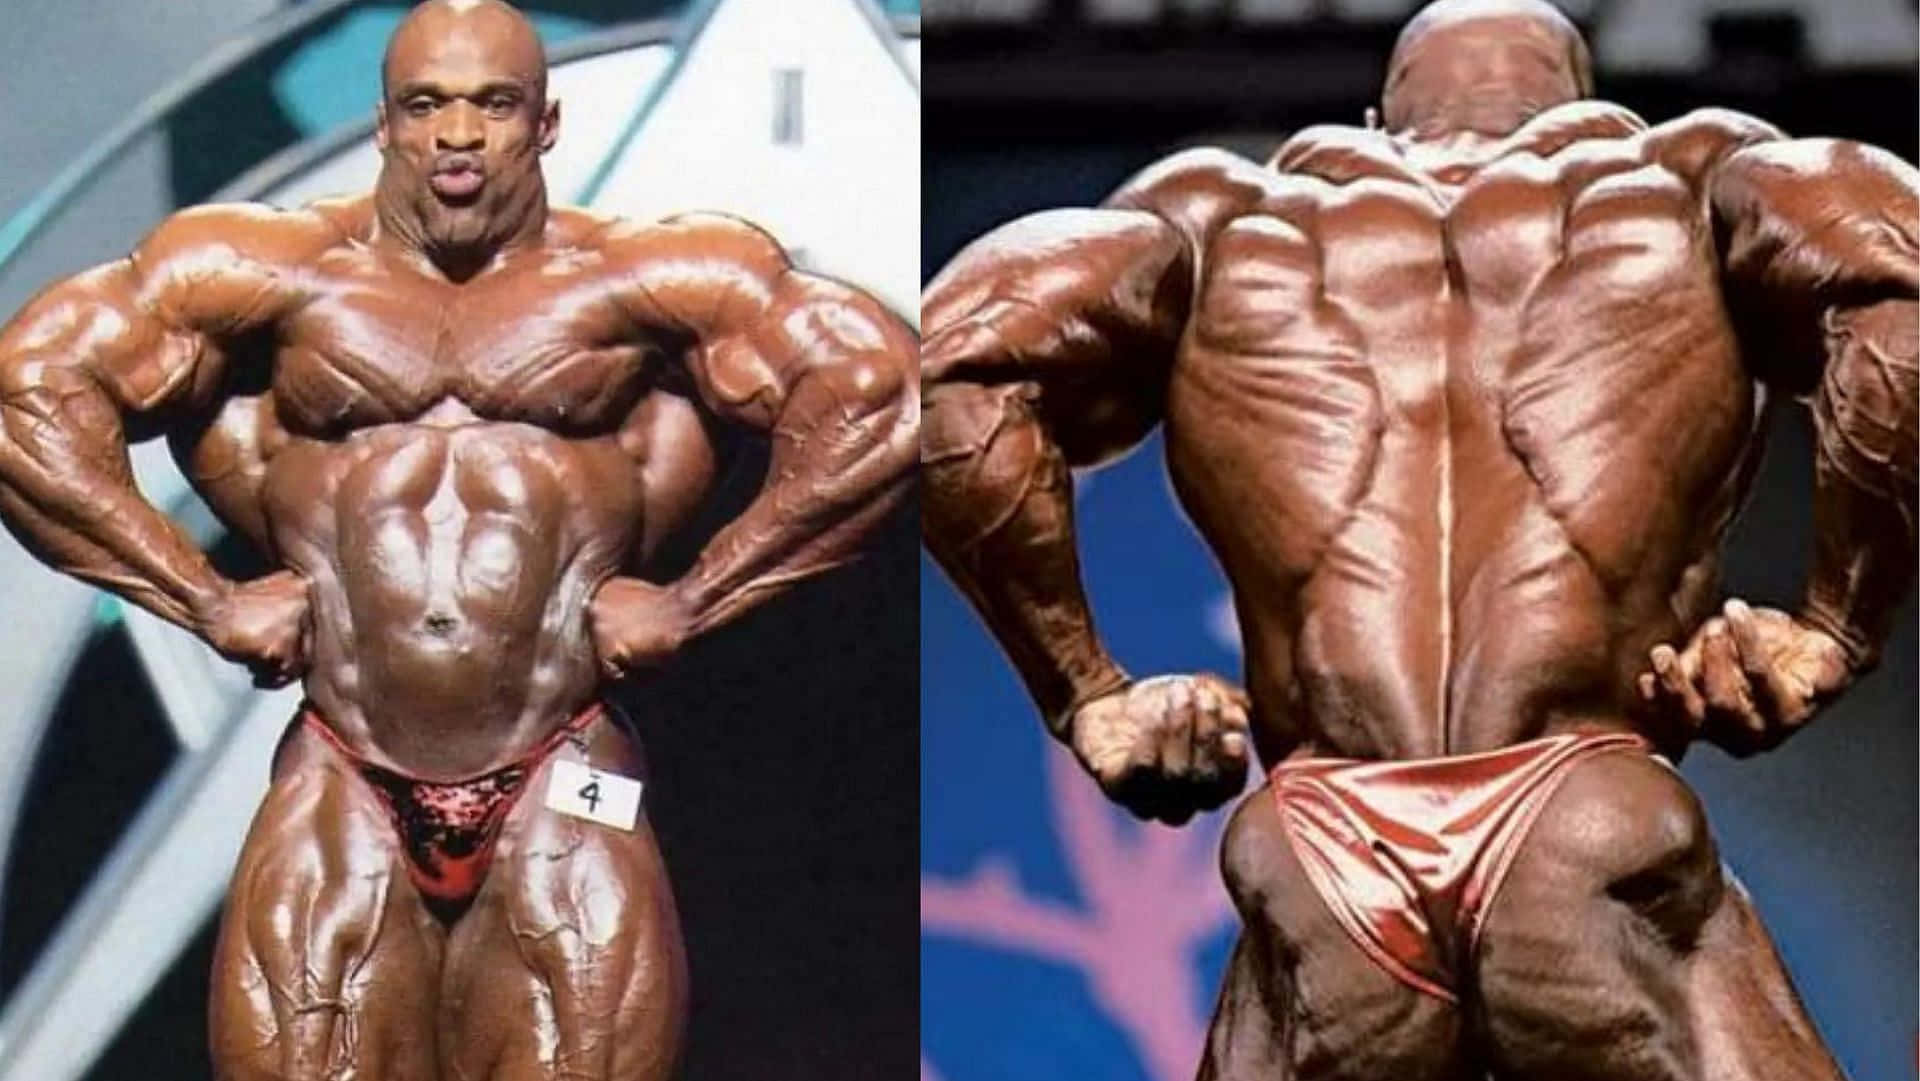 Bodybuilding GOAT Ronnie Coleman Flaunted Hardcore Workout From the 2000s  Leaving Instagram in a Frenzy - The SportsRush